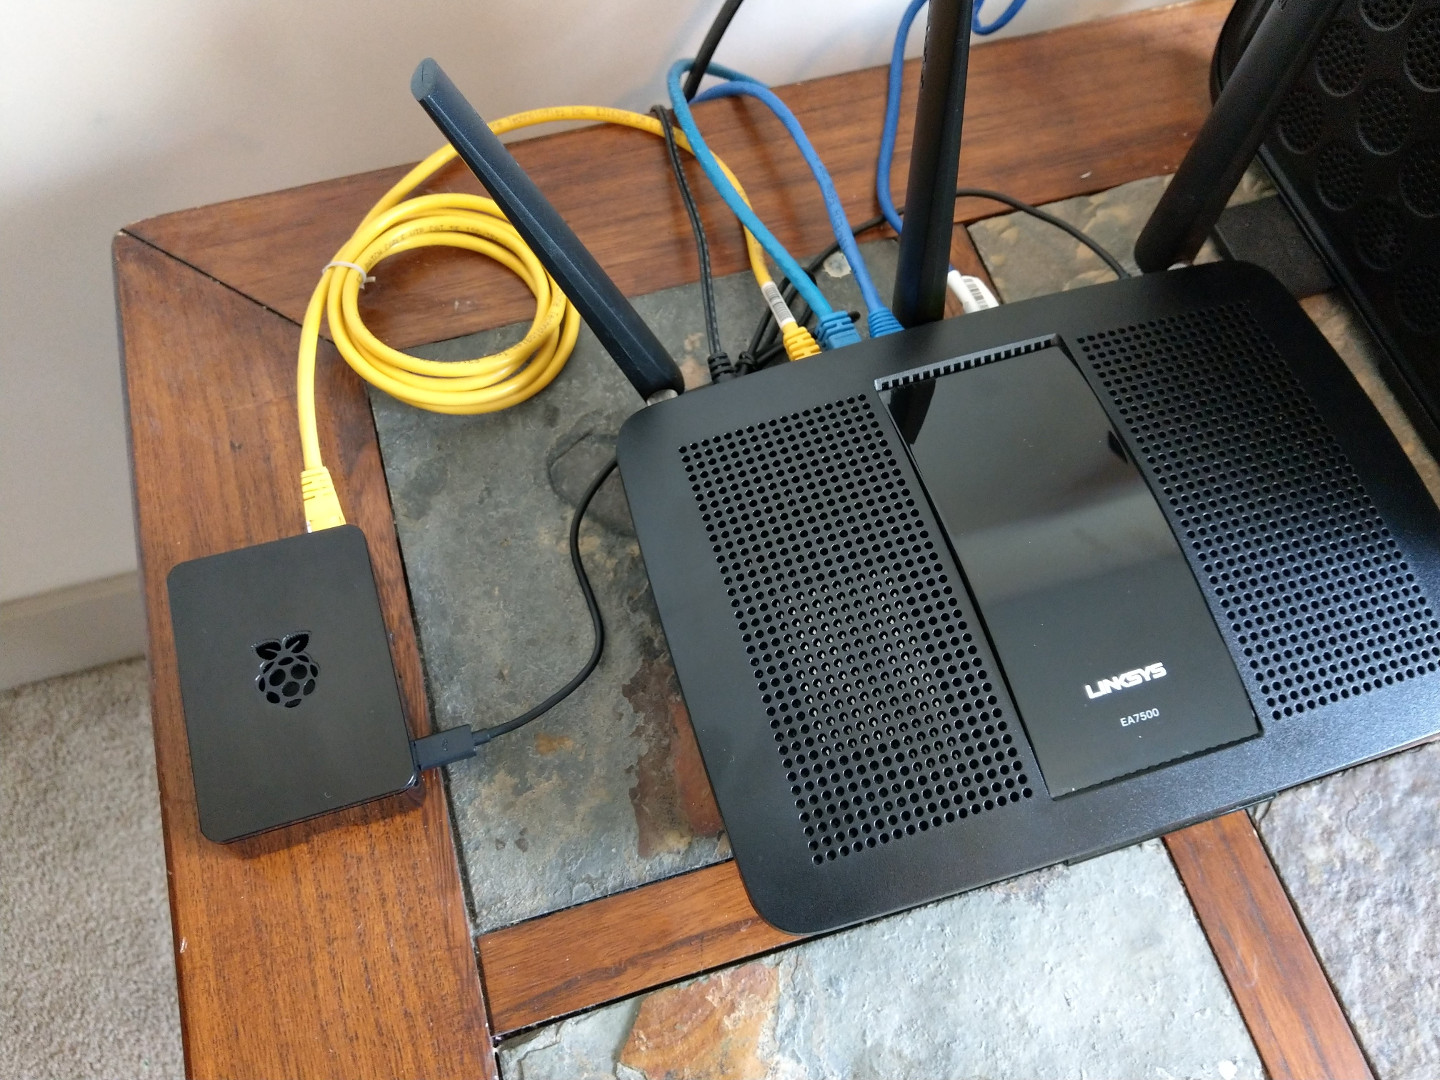 A Raspberry Pi 3 next to a wireless router